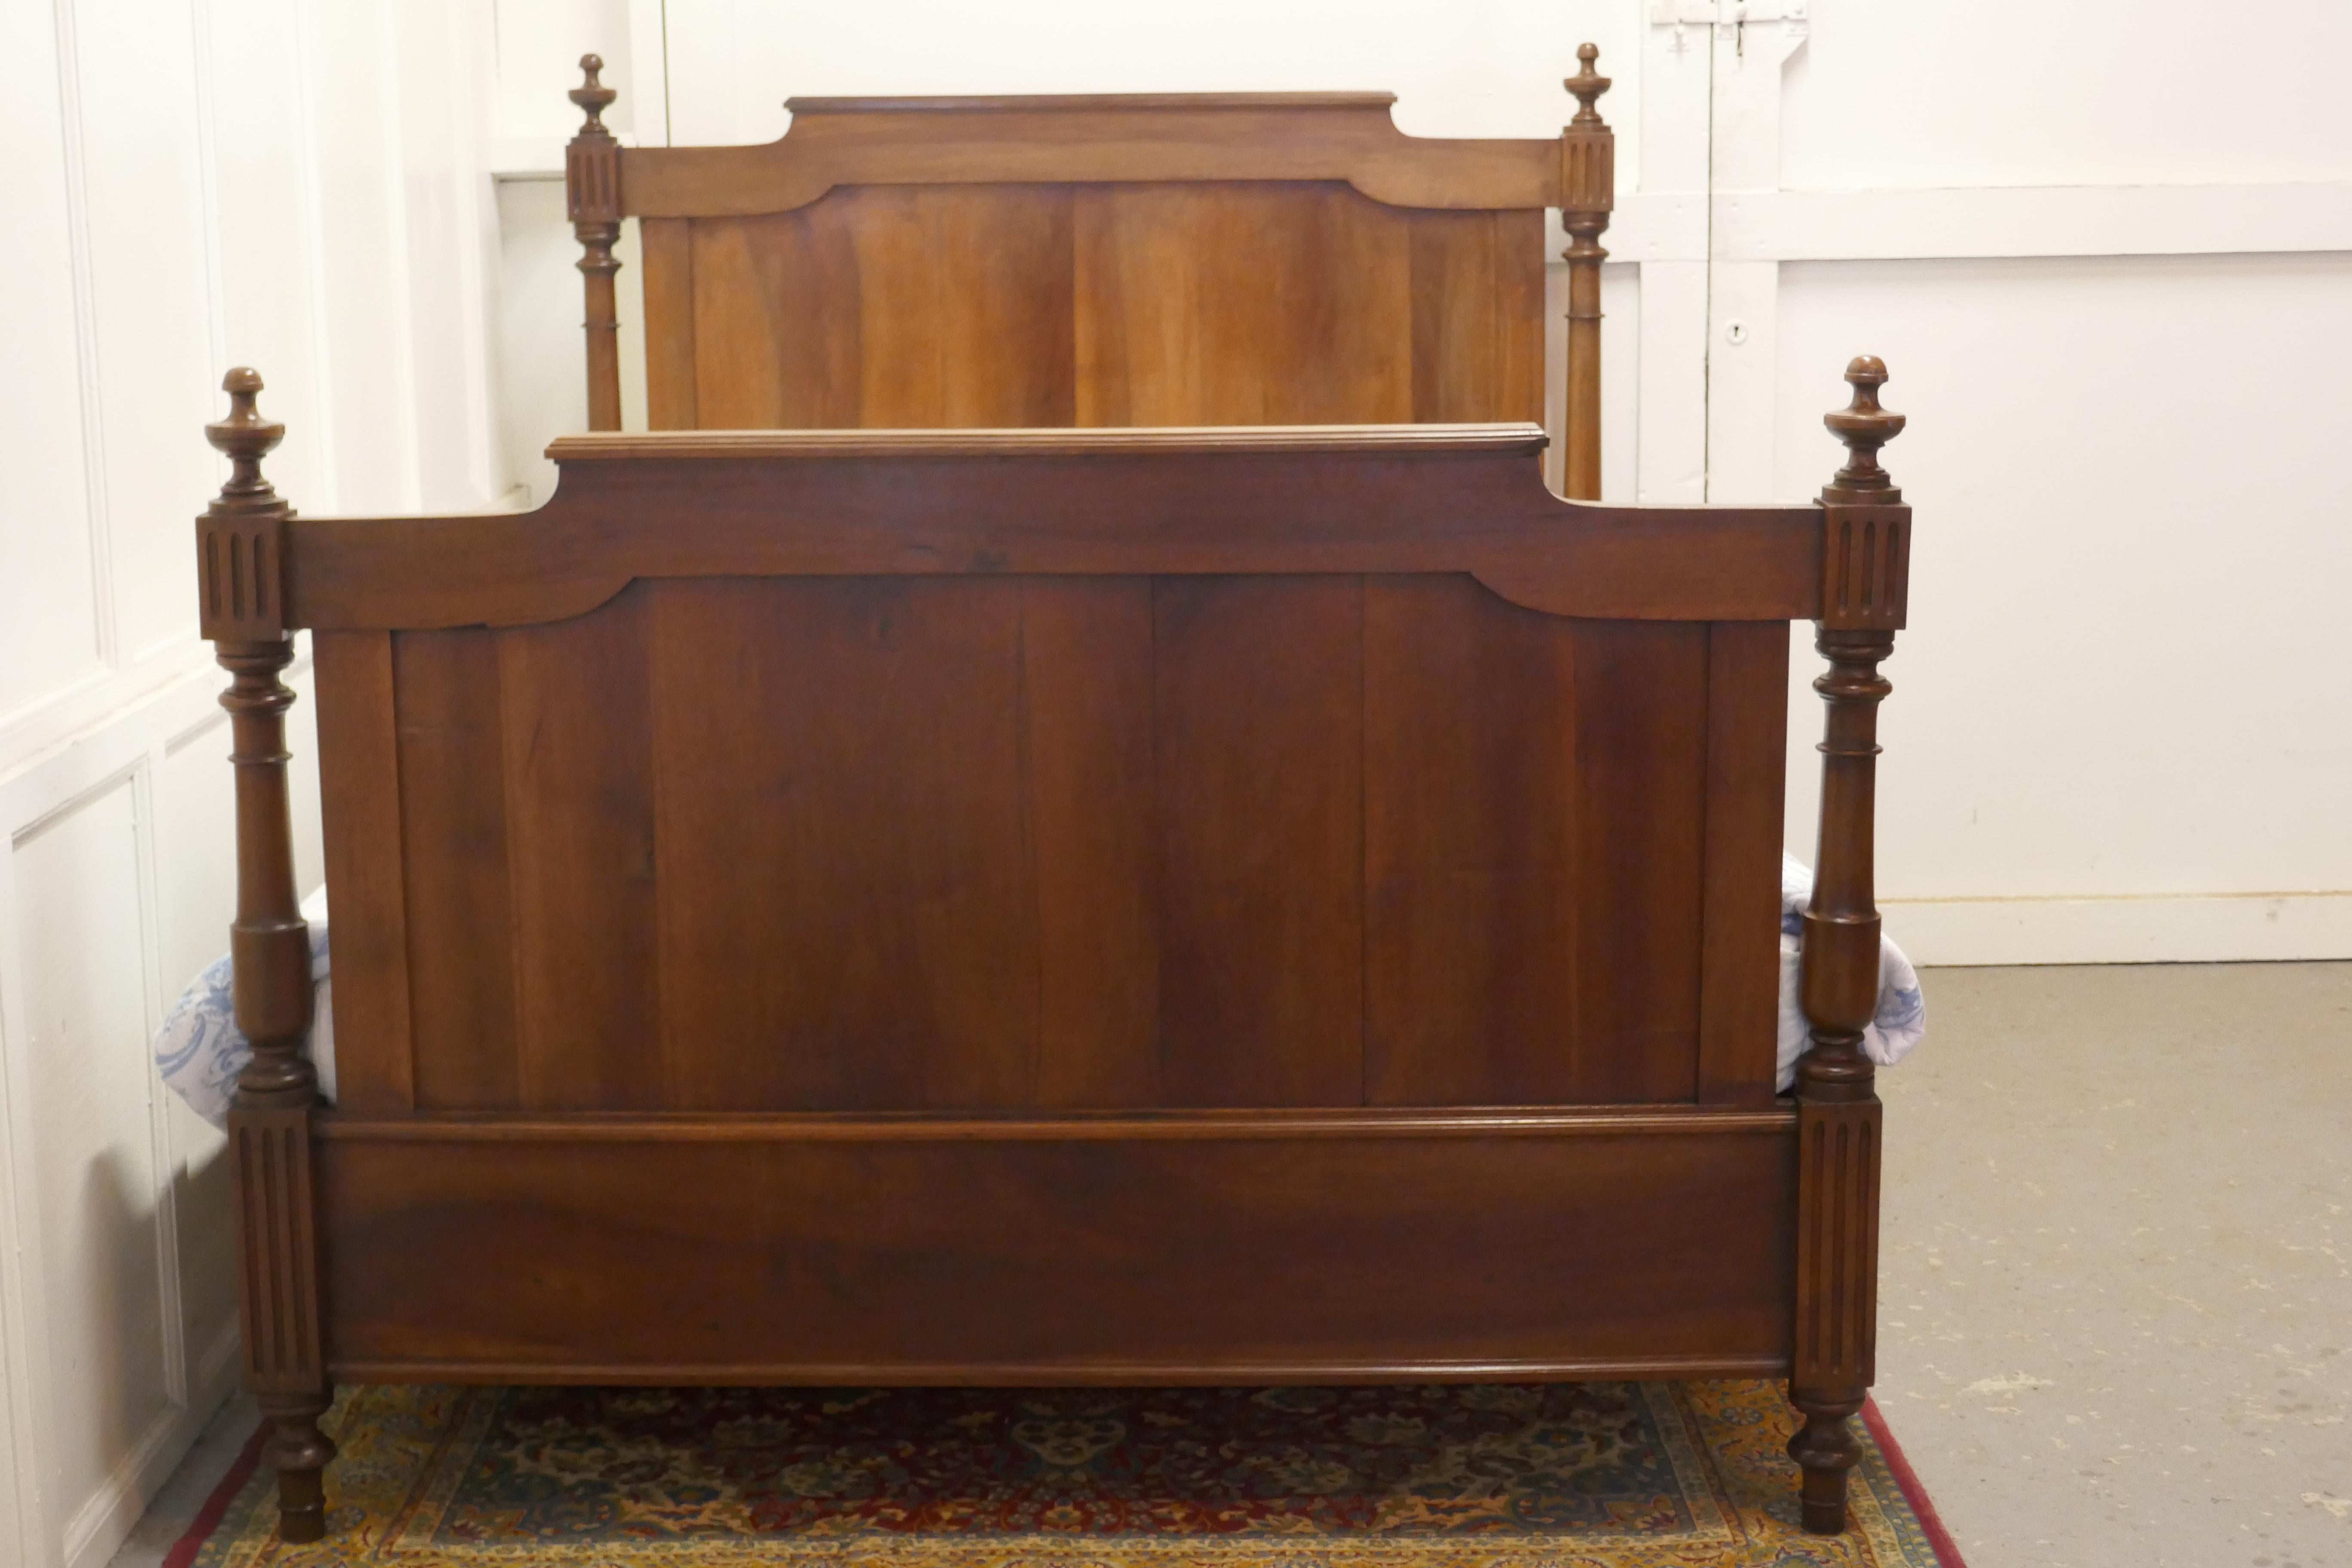 19th century French walnut double bed

This is a charming plain panelled French Walnut bed, it has turned finials at both ends and deep sides
The bed is in good condition and the patina of the walnut shines through
The bed can be used by placing